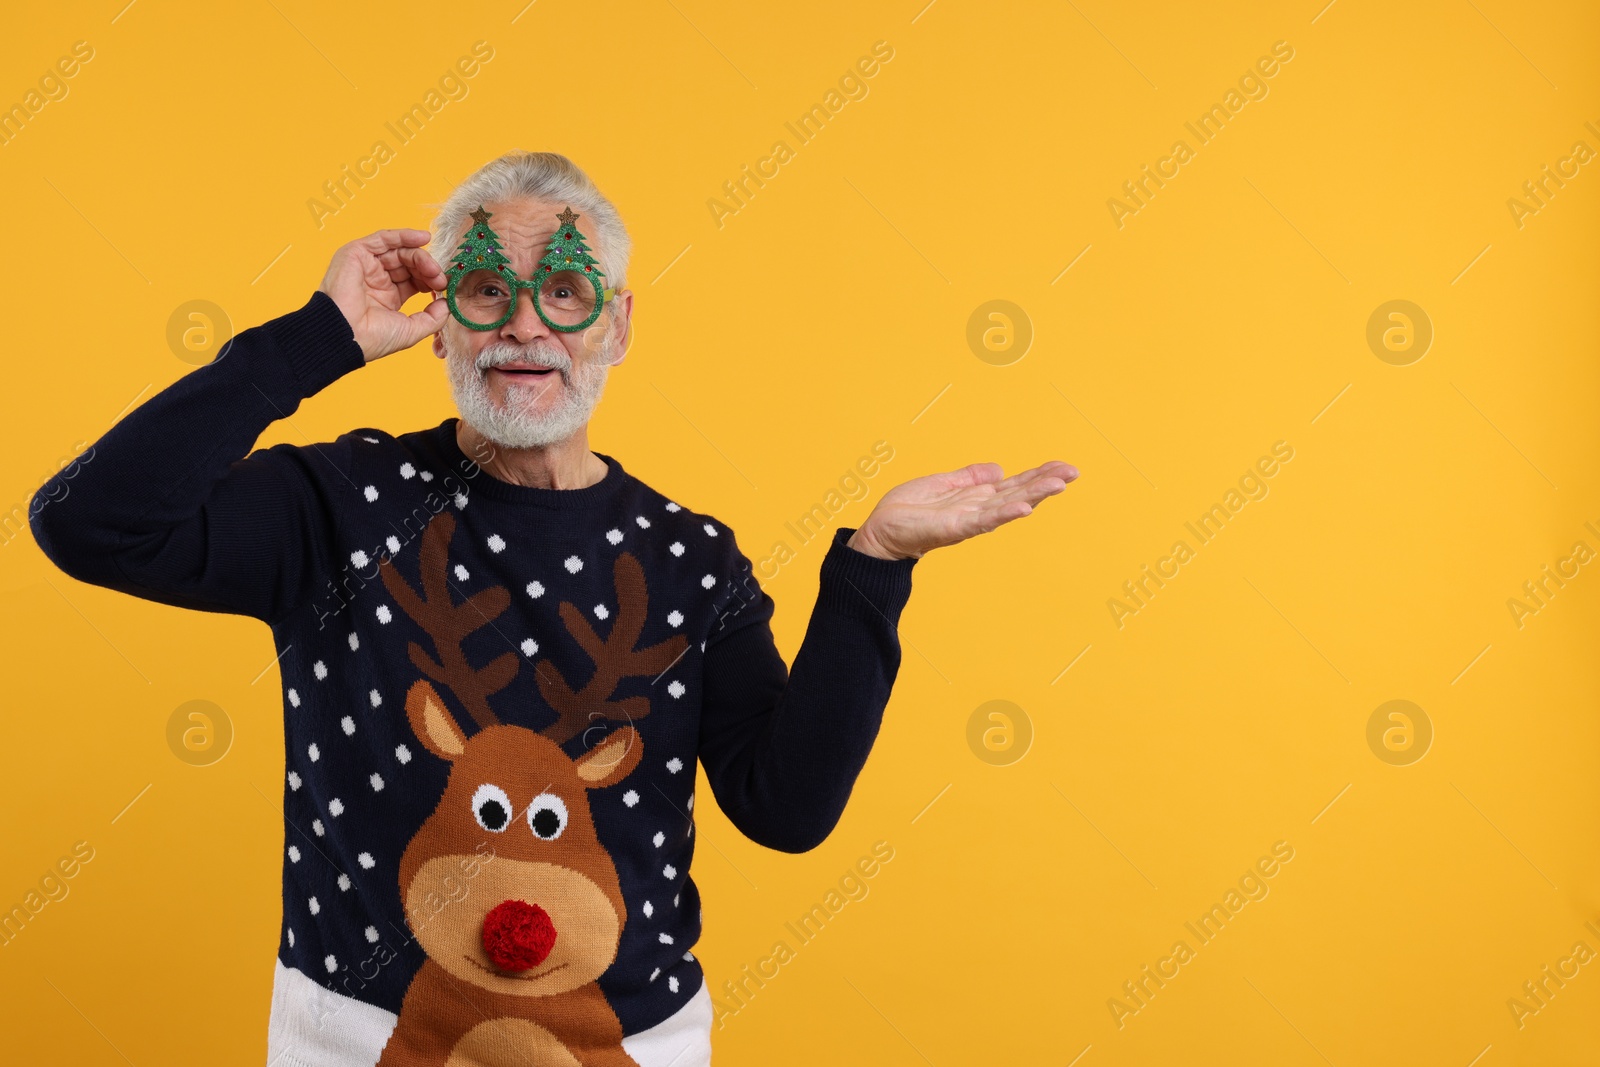 Photo of Senior man in Christmas sweater and funny glasses showing something on orange background. Space for text